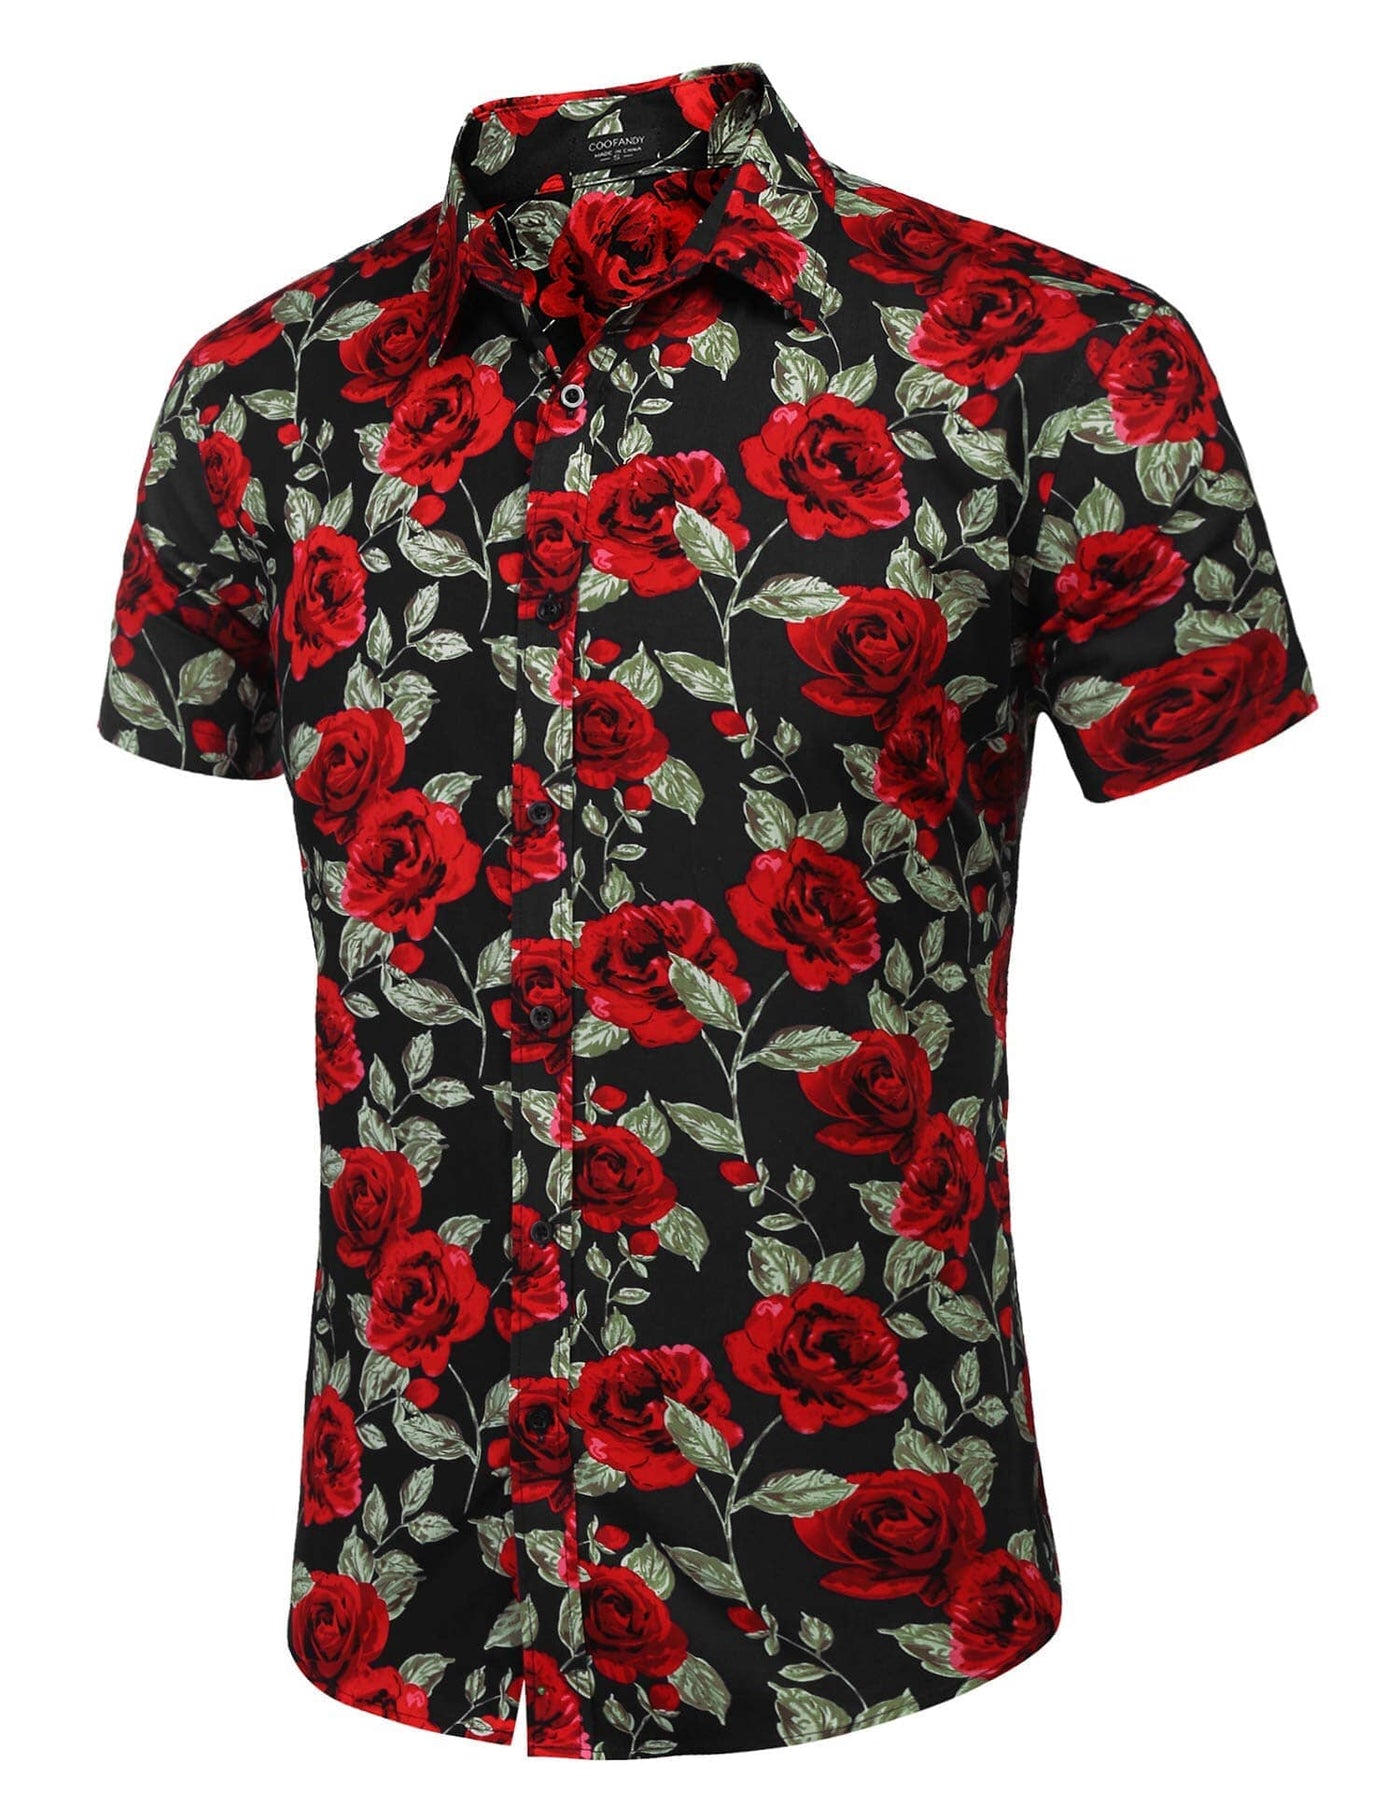 Coofandy Floral Shirts (US Only) Shirts coofandy 